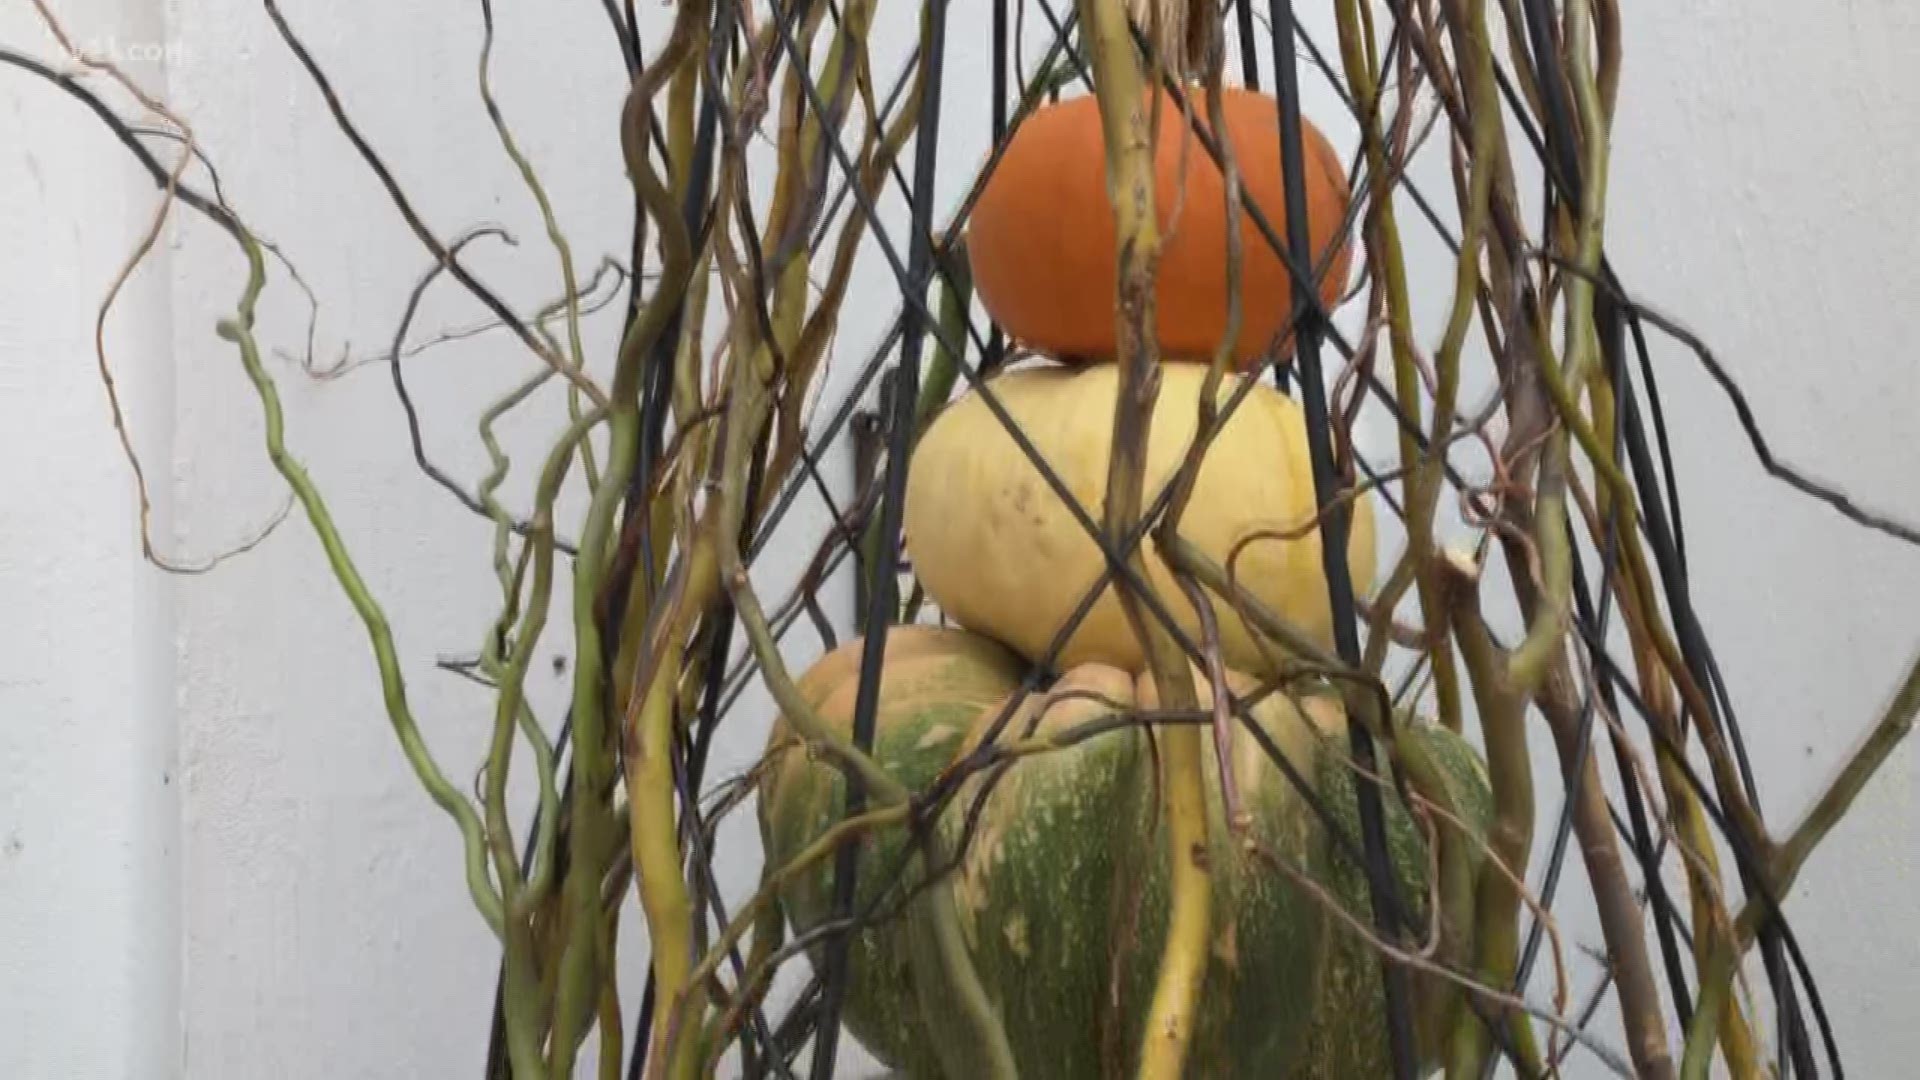 Chris H. Olsen shows you how to impress your guests at the door with pumpkins.